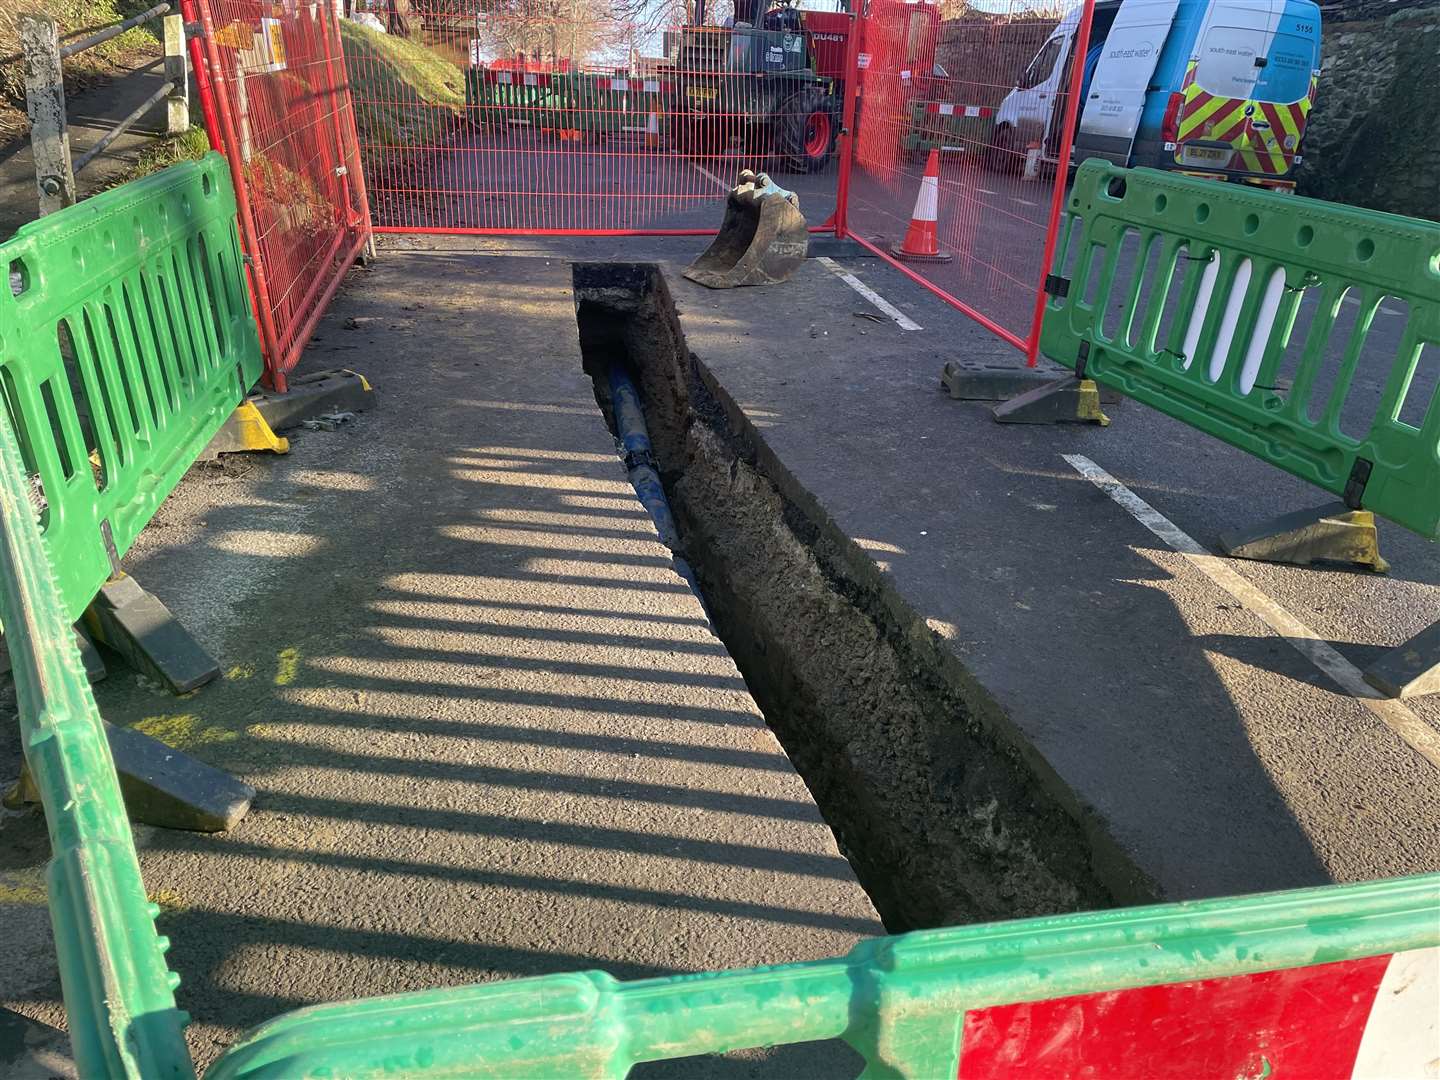 Work is ongoing to replace a 70-year-old water pipe